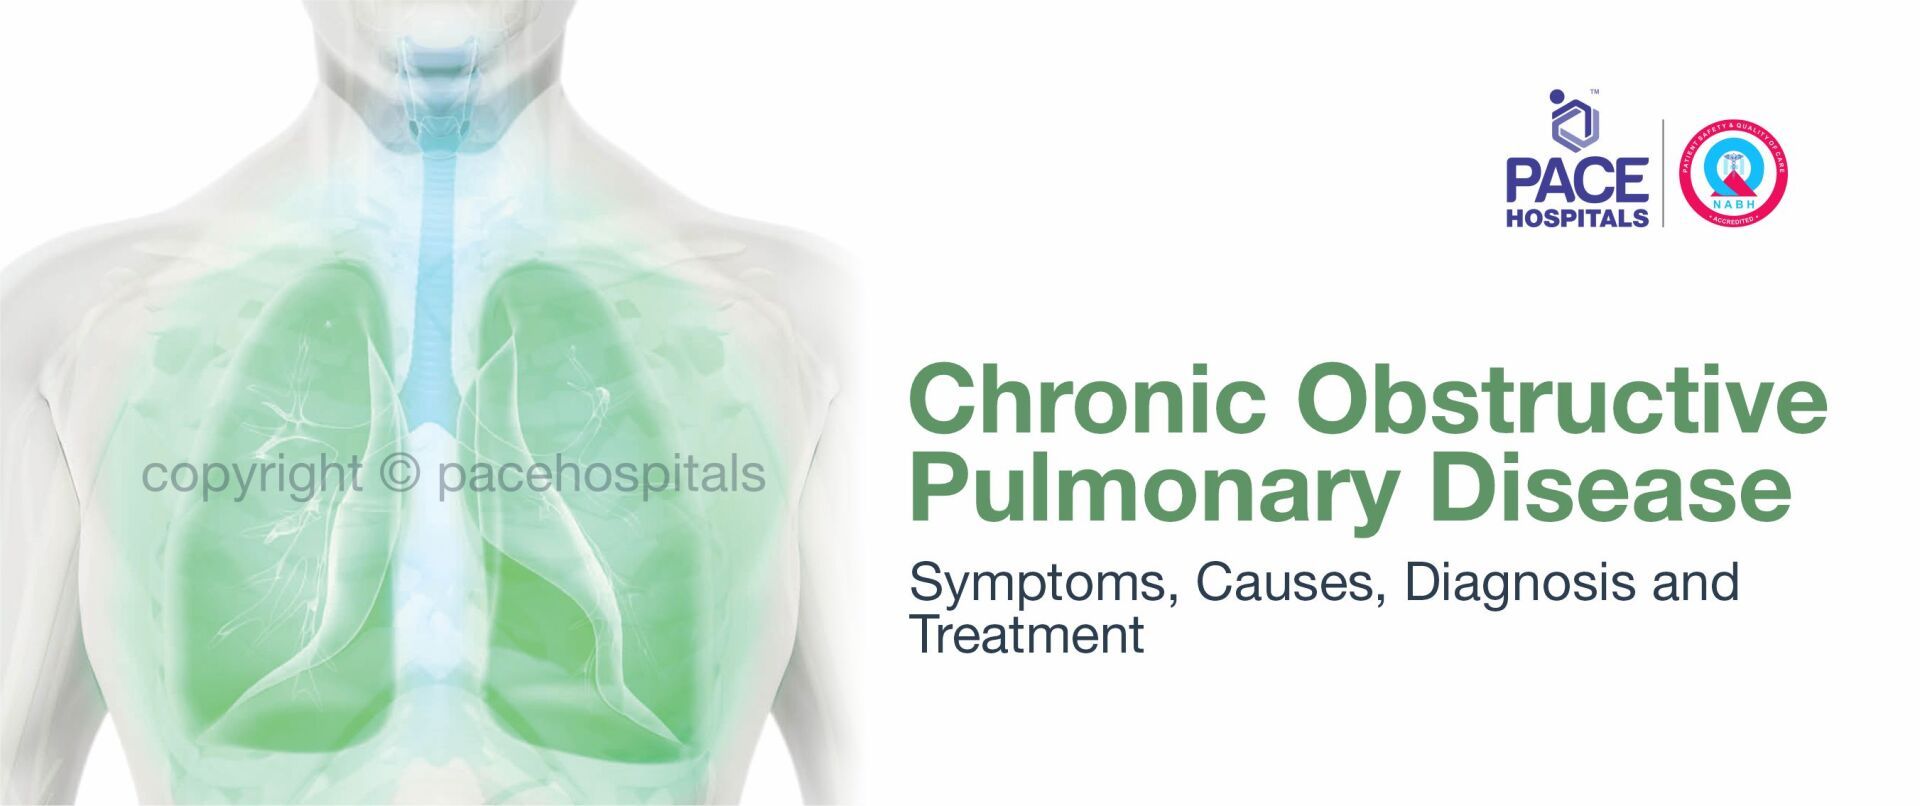 Chronic Obstructive Pulmonary Disease (COPD) - Diagnosis and Treatment